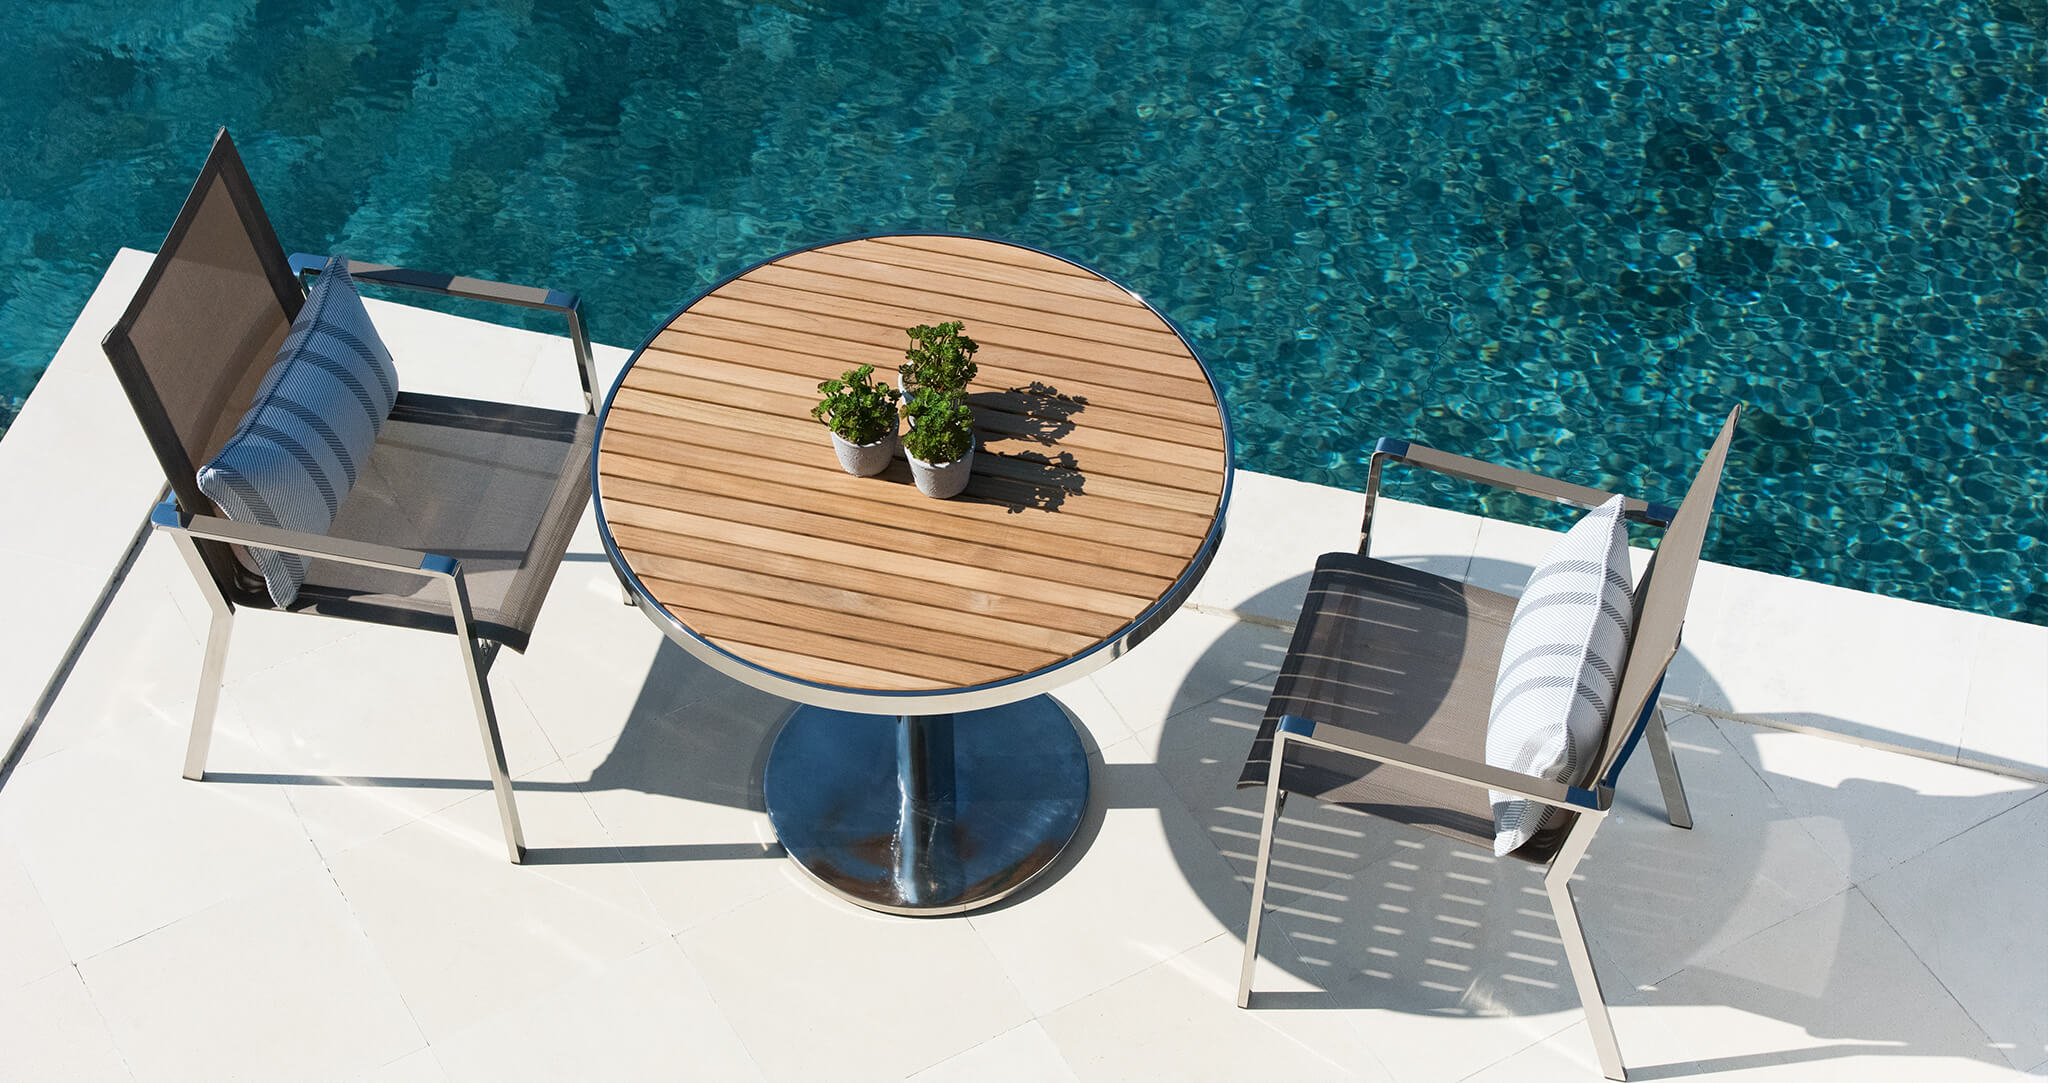 Luxury garden seating by the pool